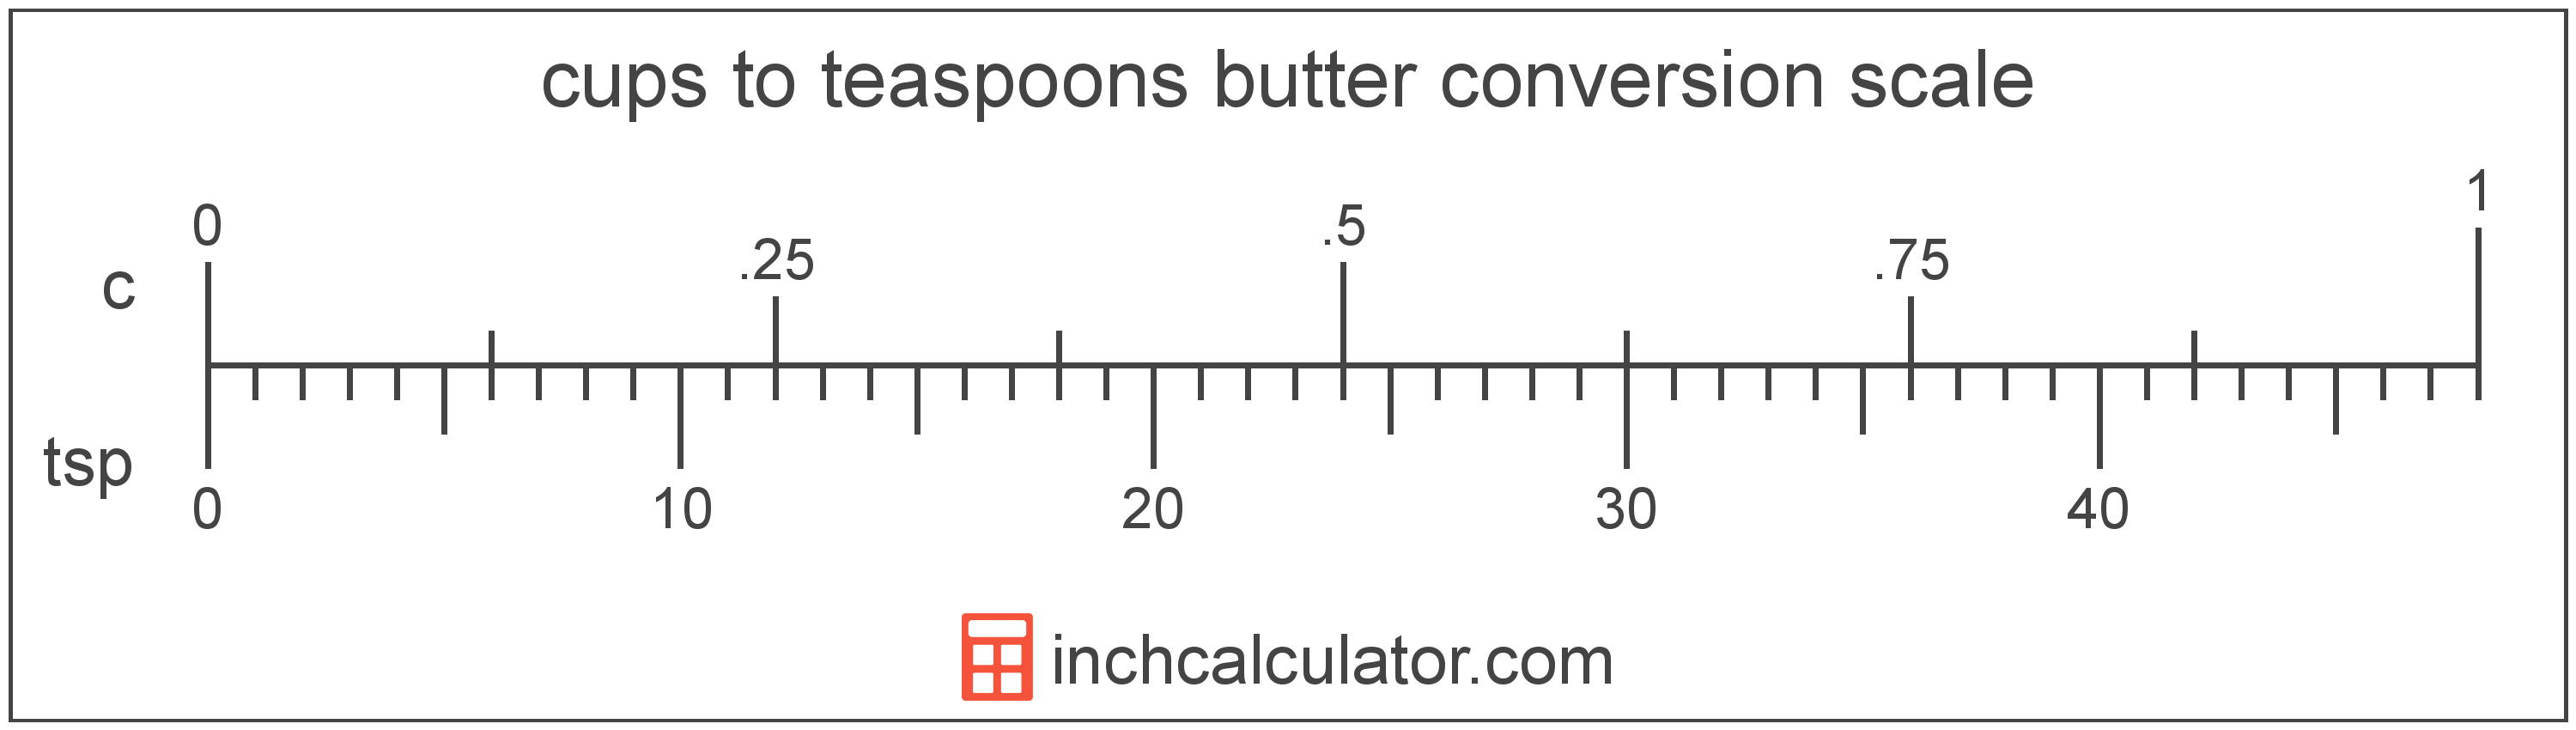 conversion scale showing cups and equivalent teaspoons butter values